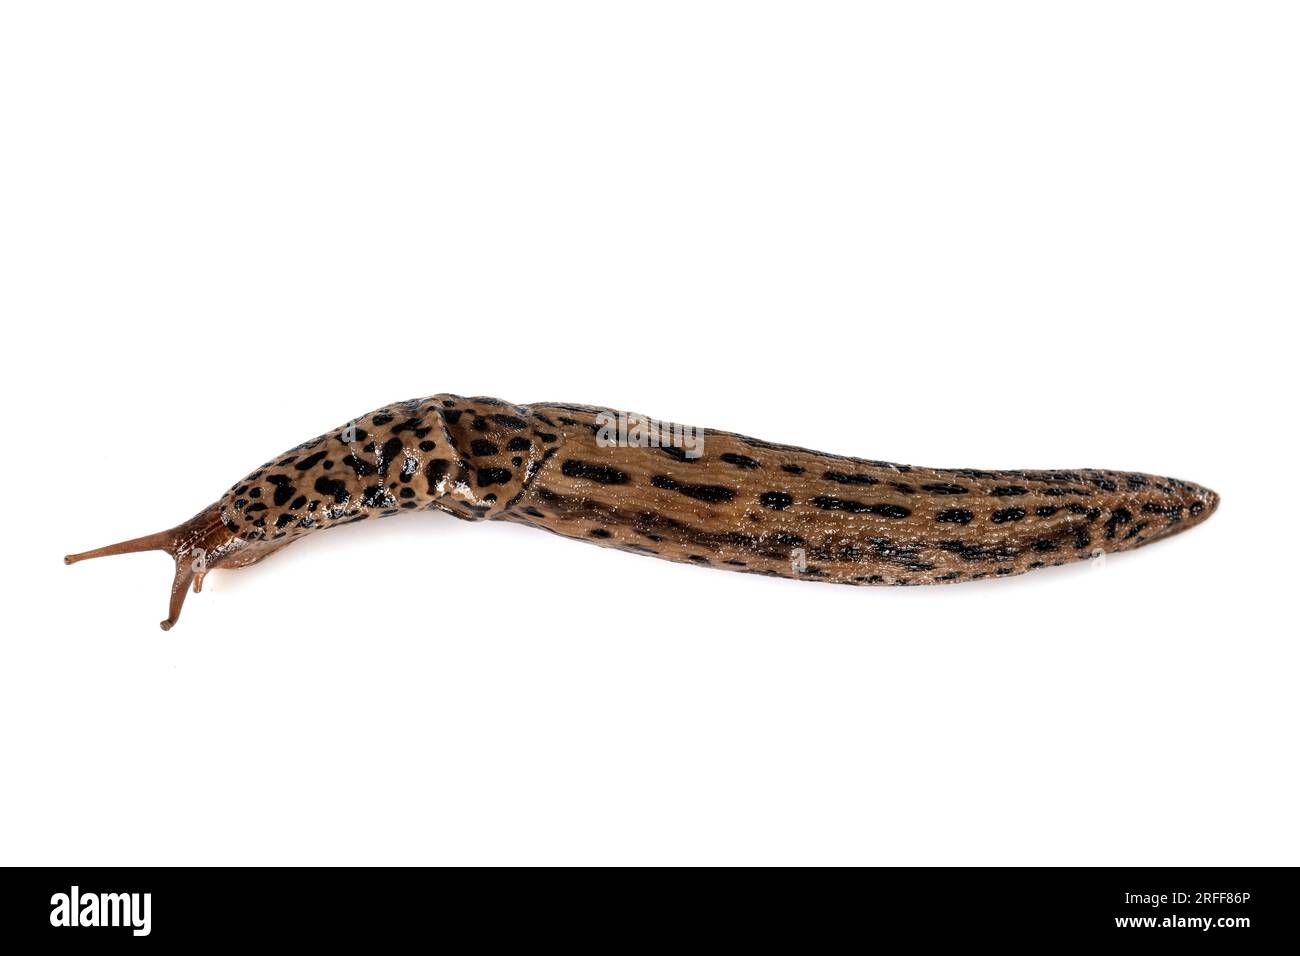 Limax maximus in front of white background Stock Photo